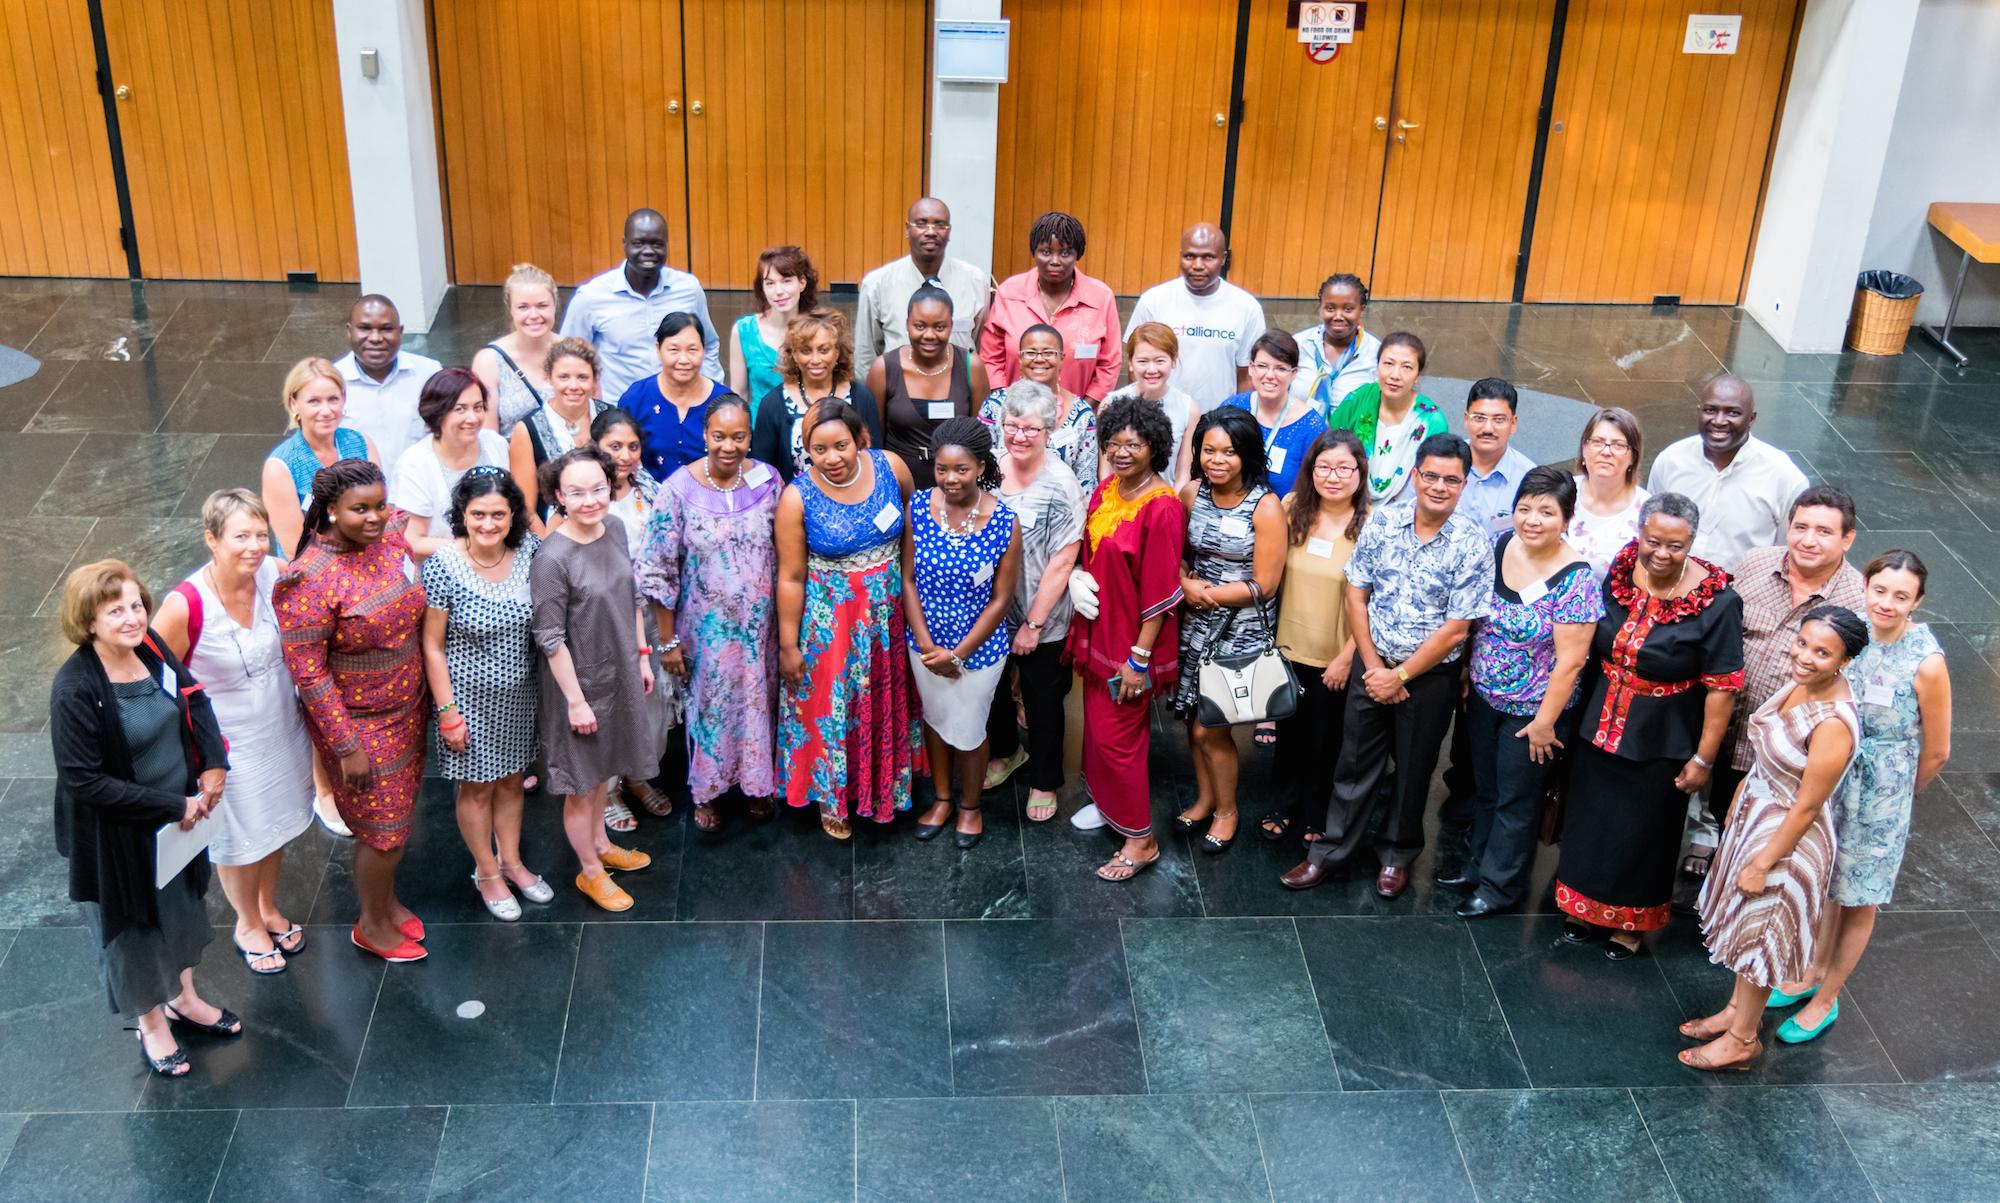 Women's advocacy meeting participants on the opening day. Photo: WCC/Albin Hillert